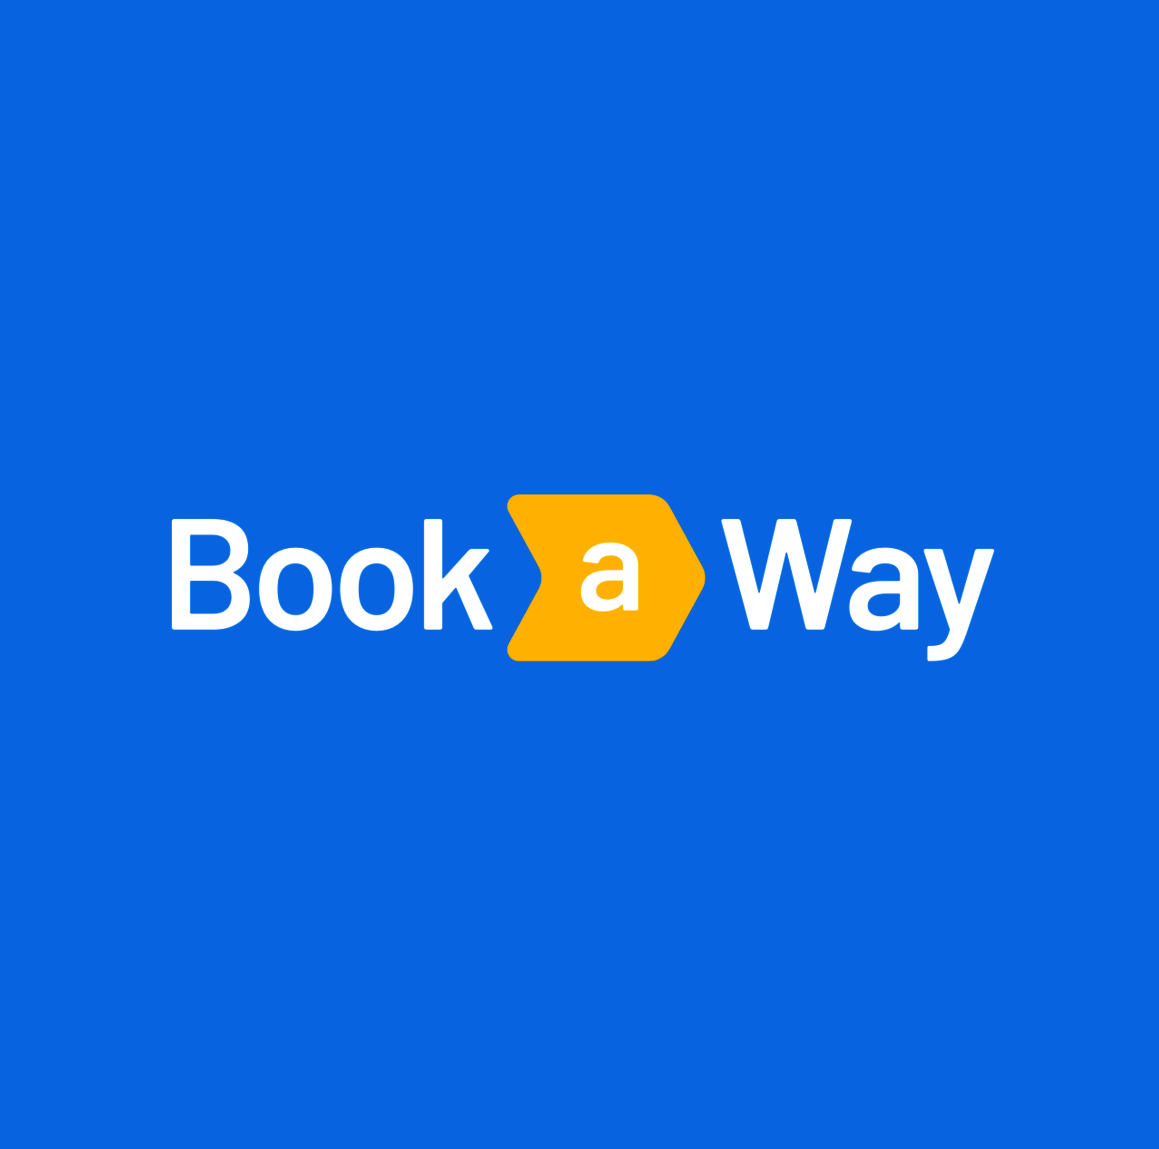 Find Your Way With Bookaway